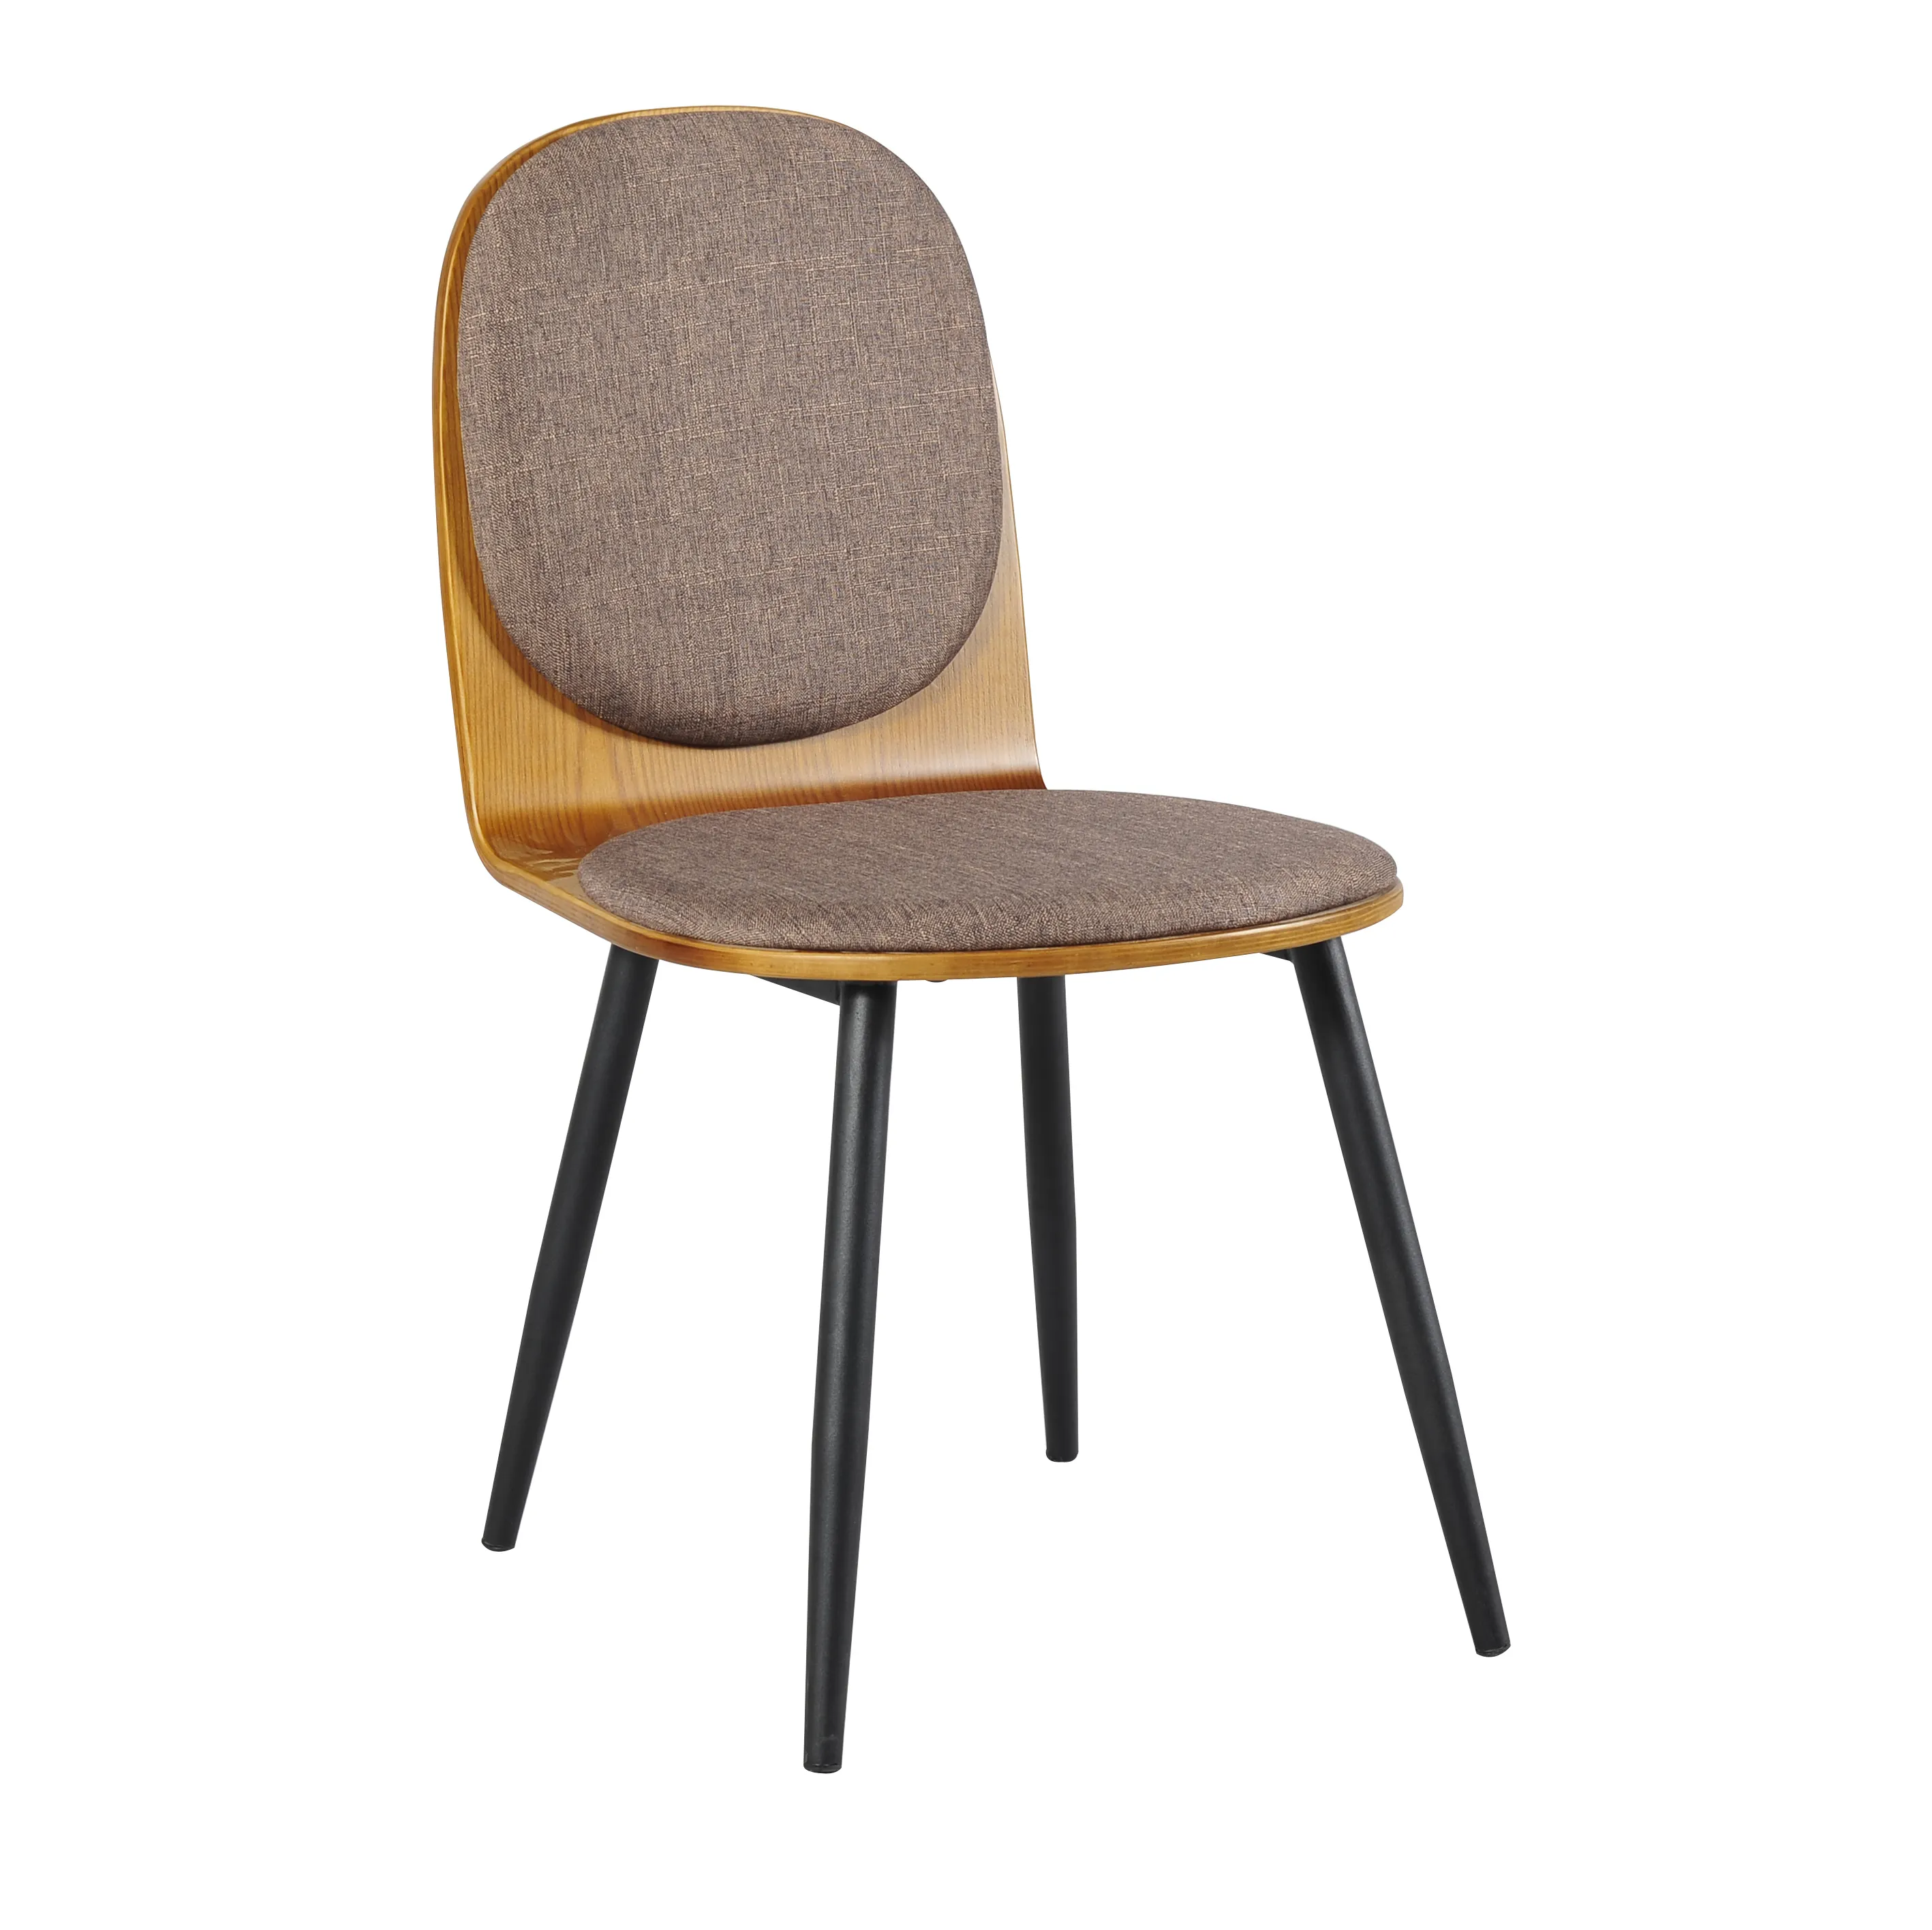 Comfortable Fabric Plywood Backrest Metal Legs Dining Chair